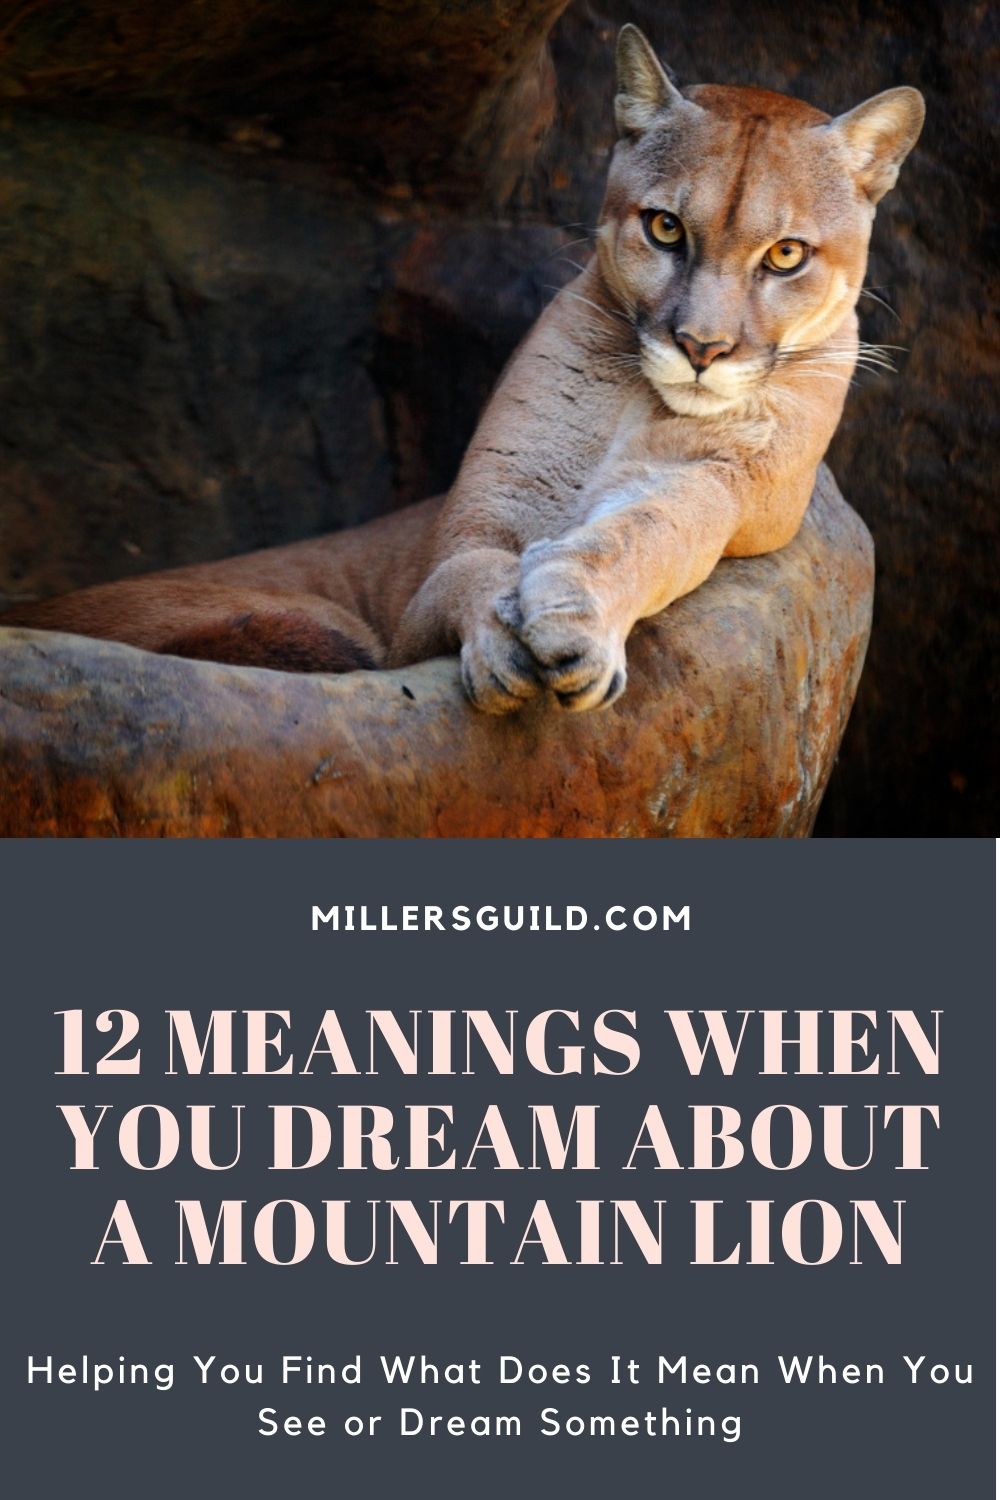 How To Interpret Dreams Of Mountain Lions